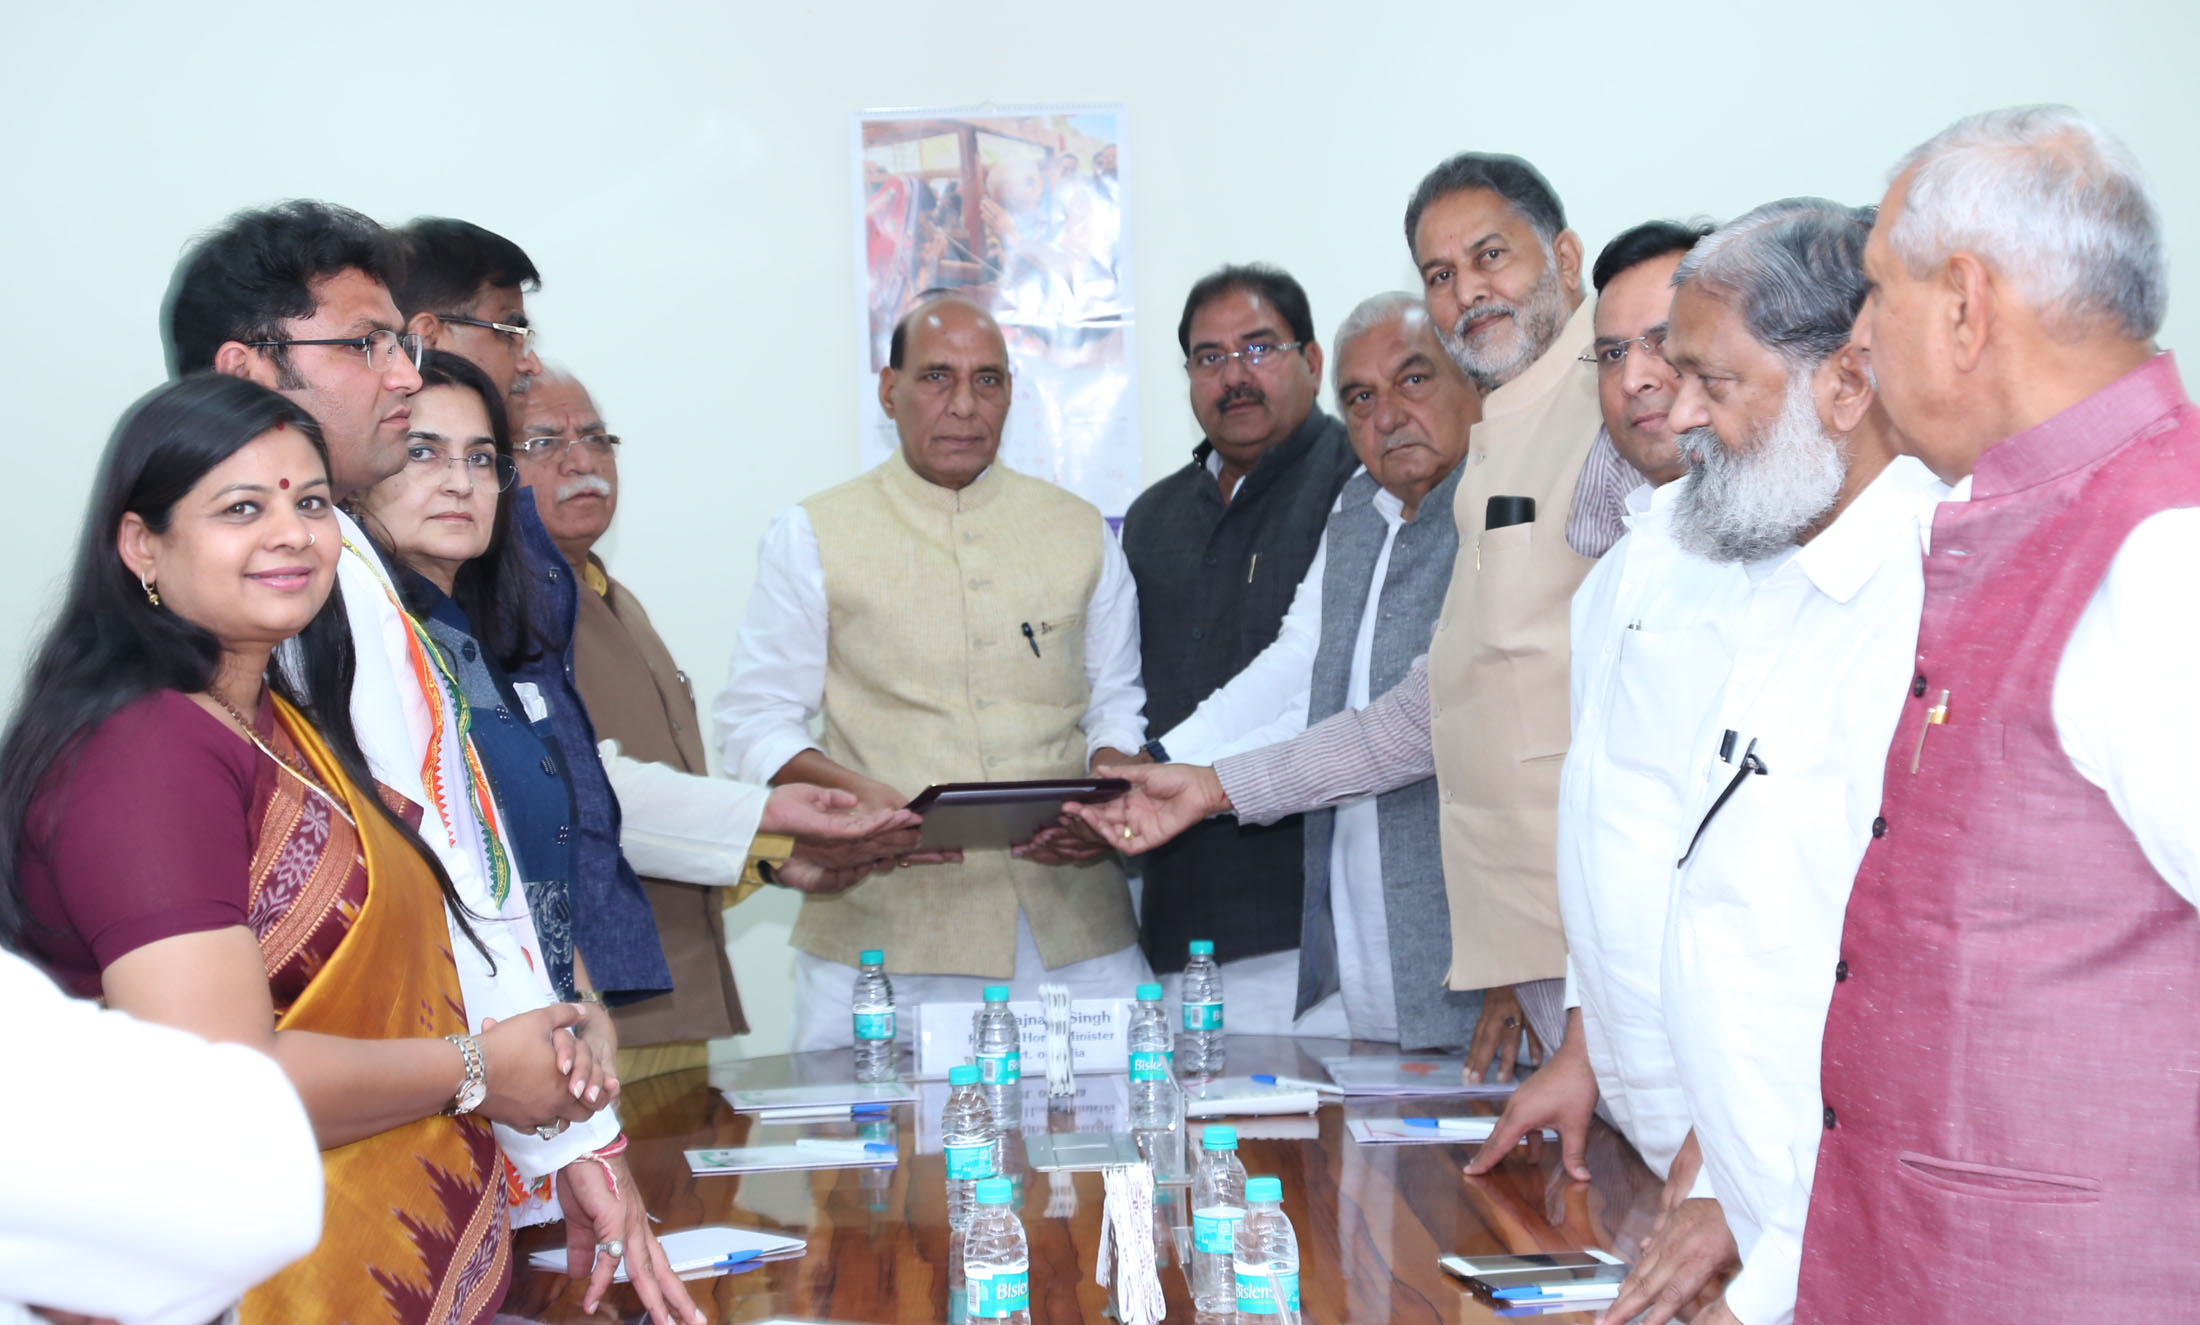 The All-Party delegation led by the Chief Minister of Haryana, Shri Manohar Lal Khattar calling on the Union Home Minister, Shri Rajnath Singh, regarding Satluj-Yamuna Link Canal issue, in New Delhi on March 24, 2017.